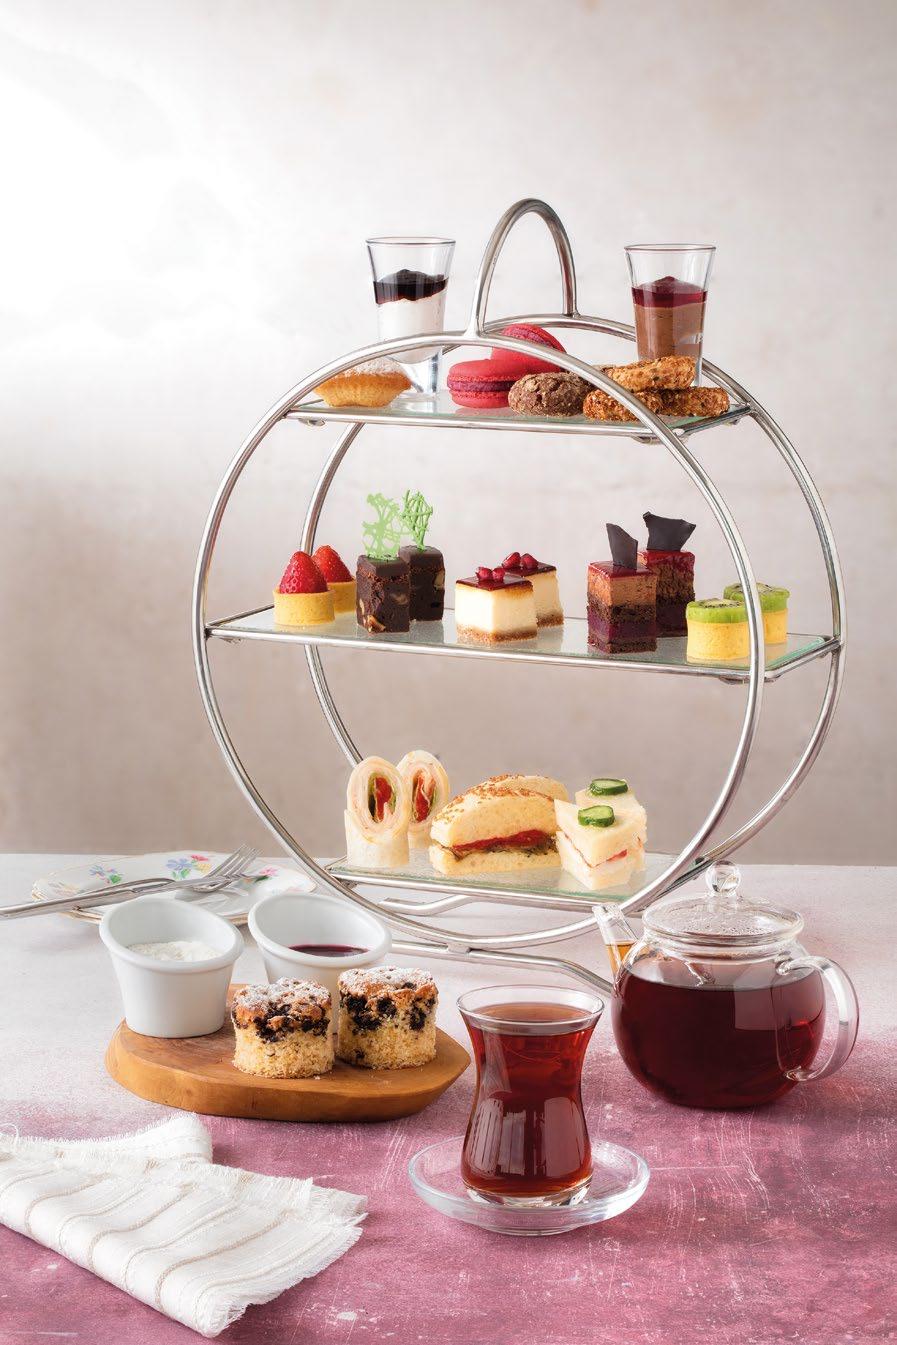 What about a quintessentially excellent afternoon tea experience?